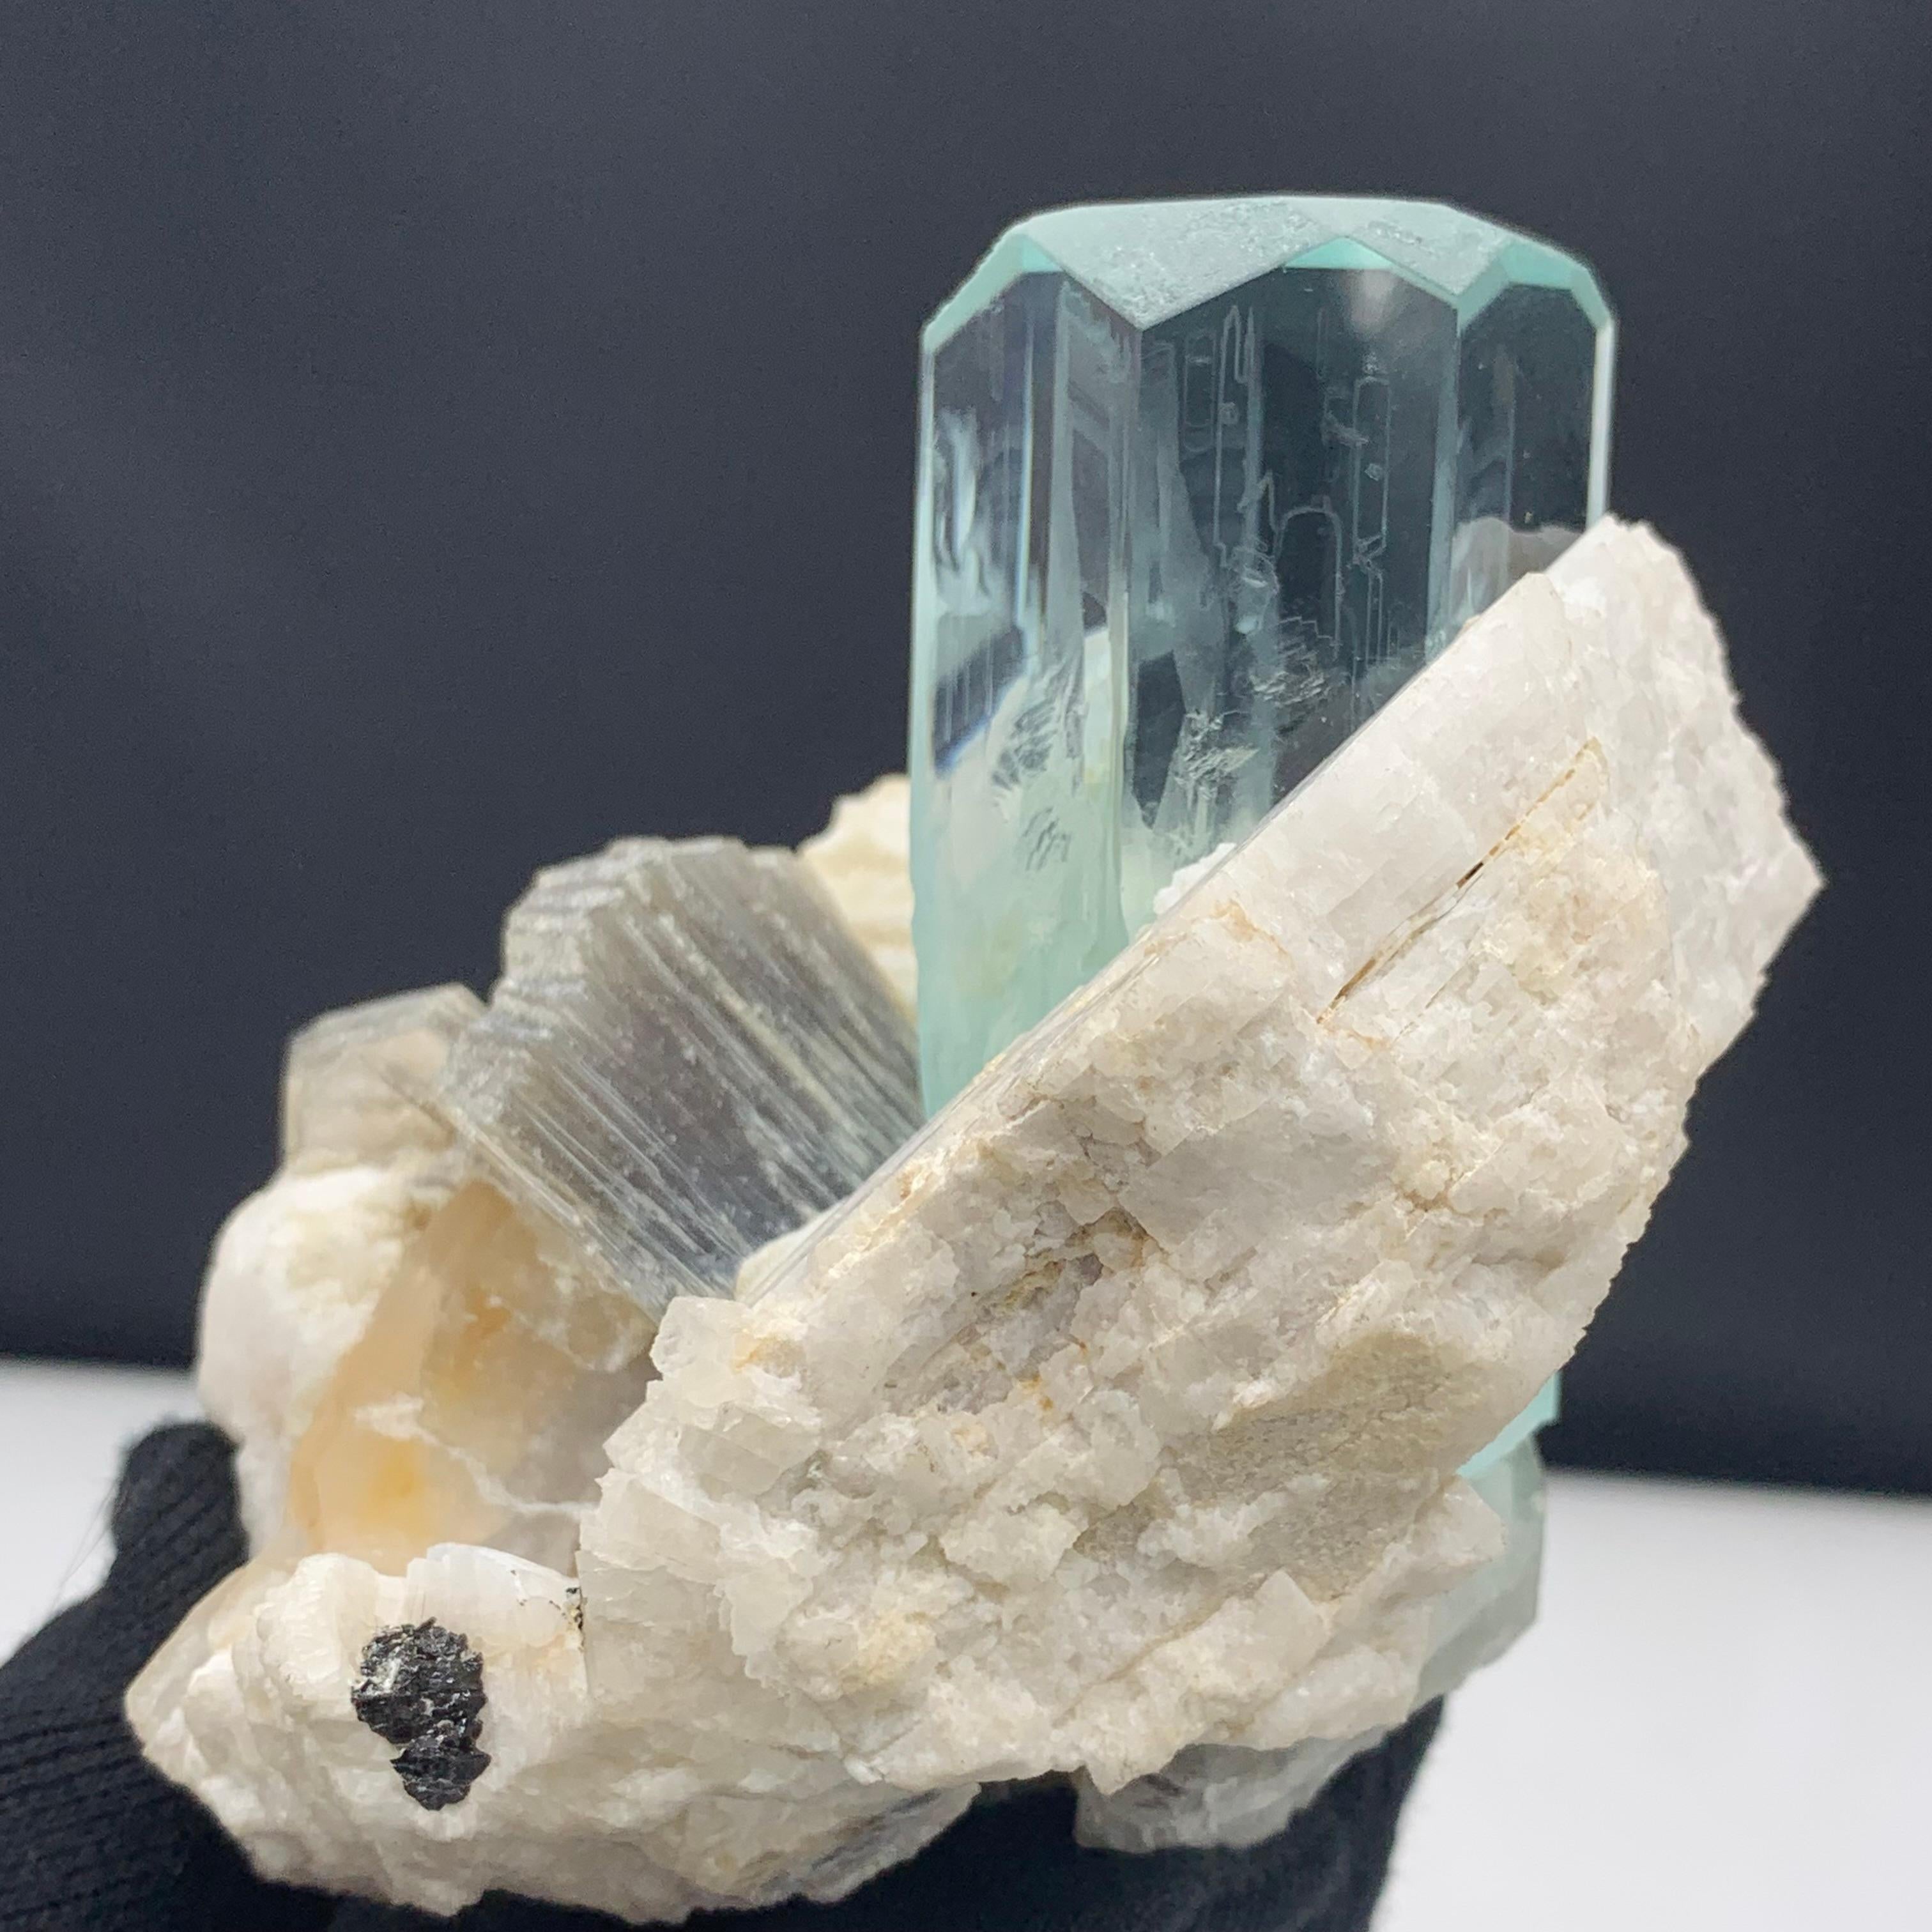 18th Century and Earlier 441 Gram Exquisite Aquamarine Specimen With Mica And Feldspar From Pakistan  For Sale